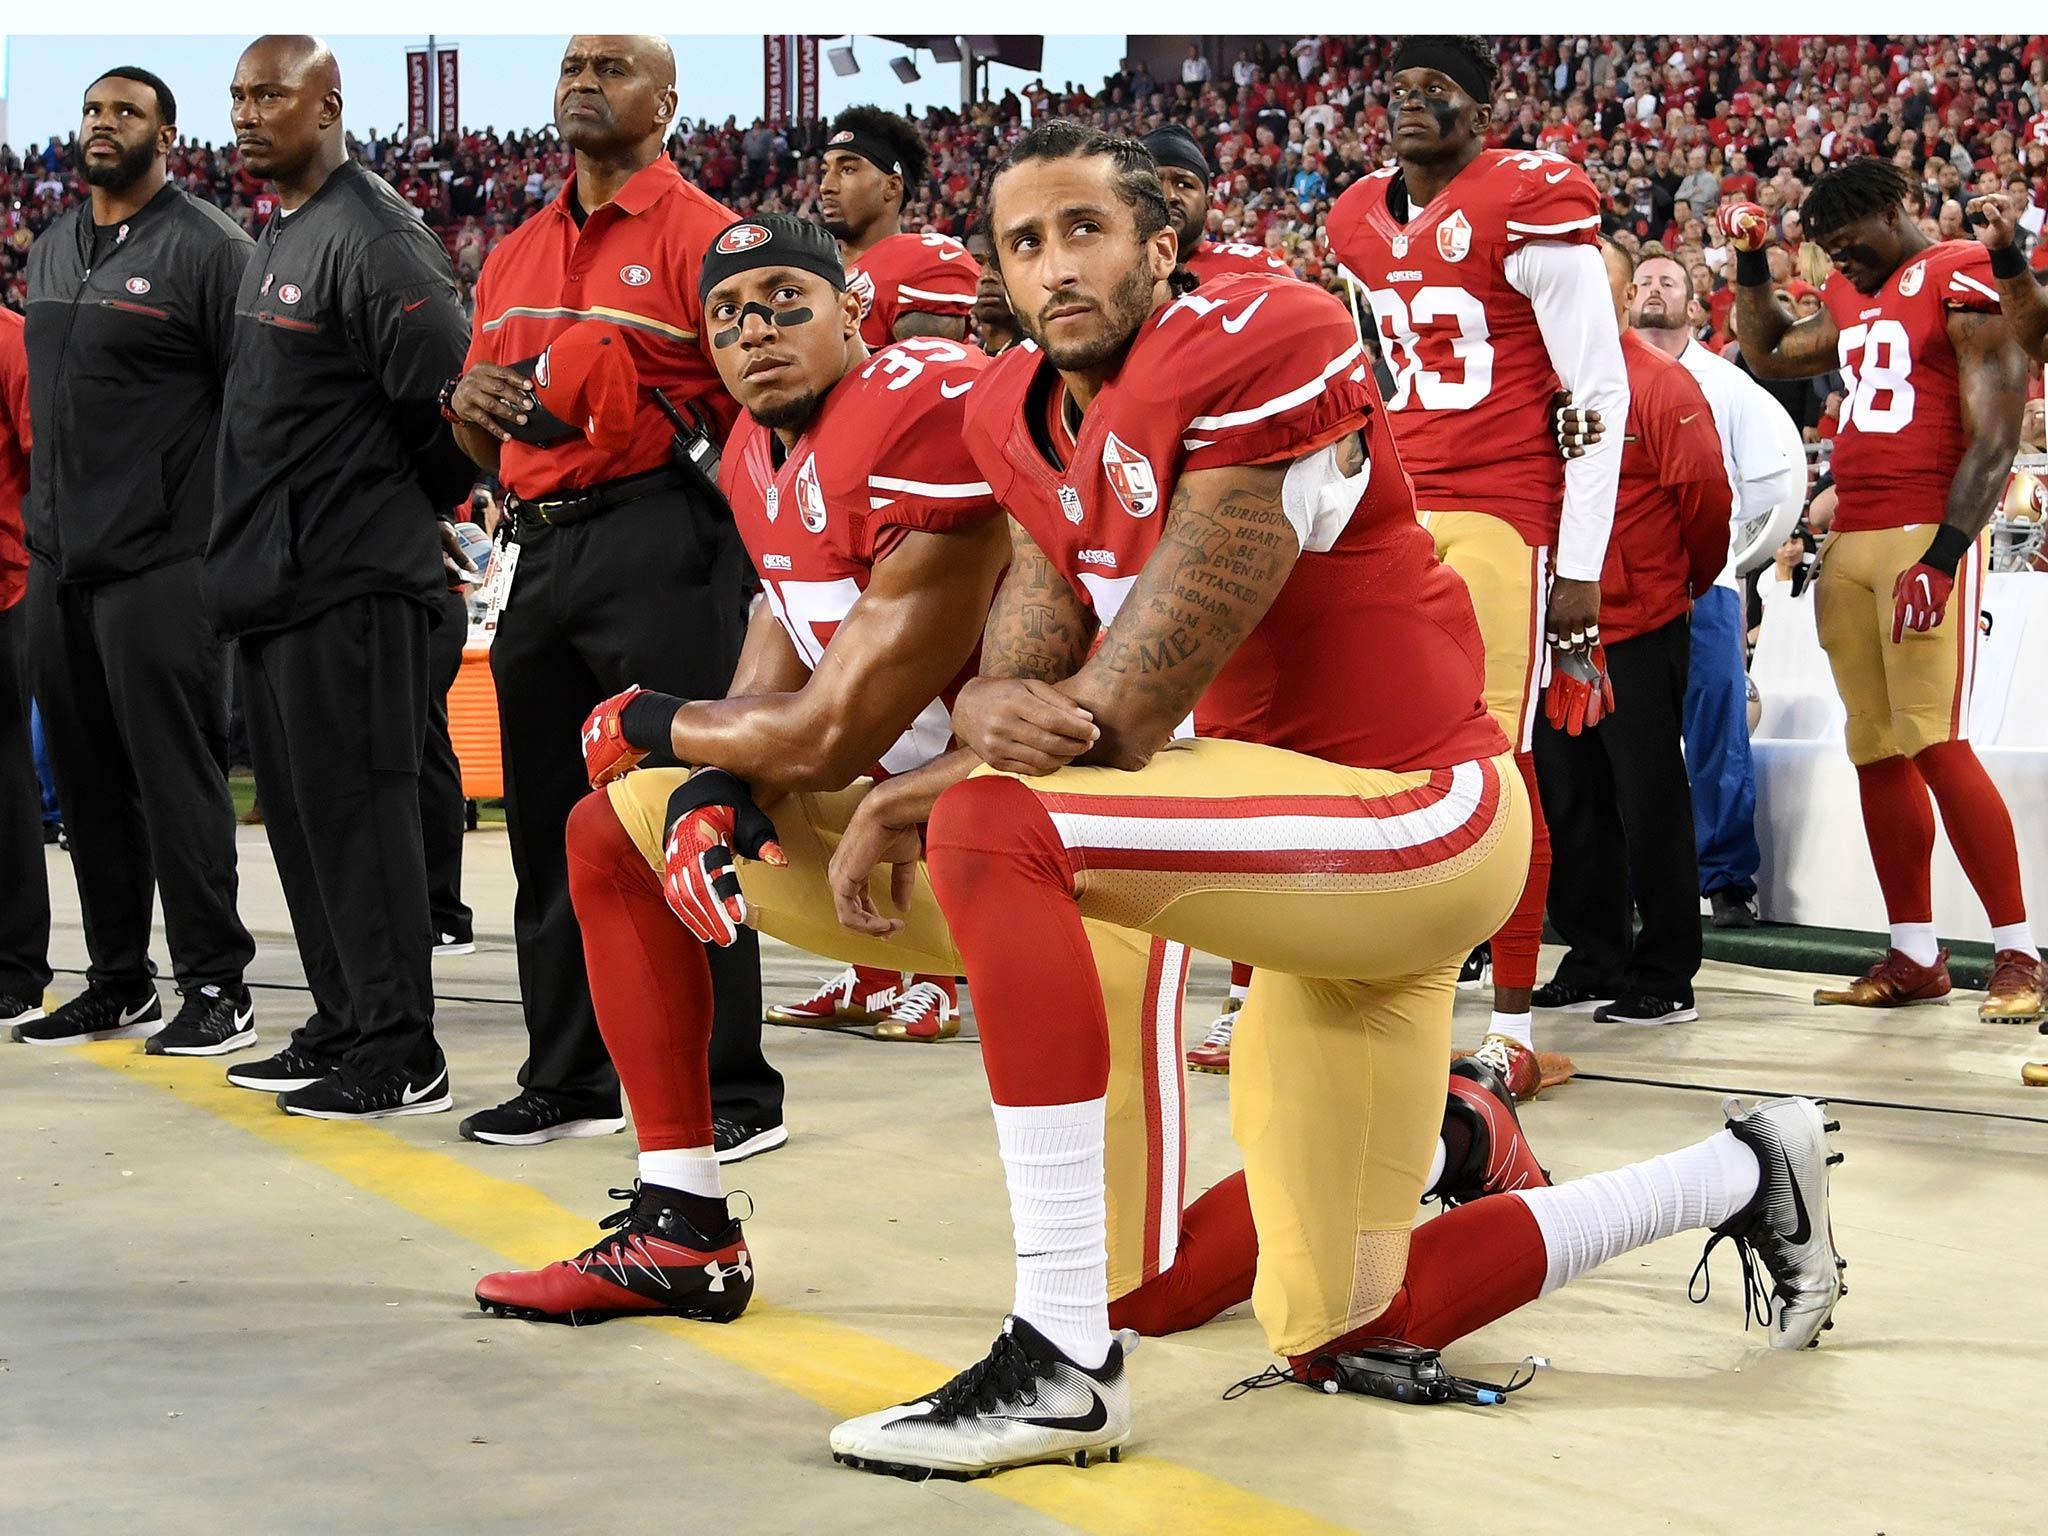 Nfl To Fine Players For Kneeling In Protest During The